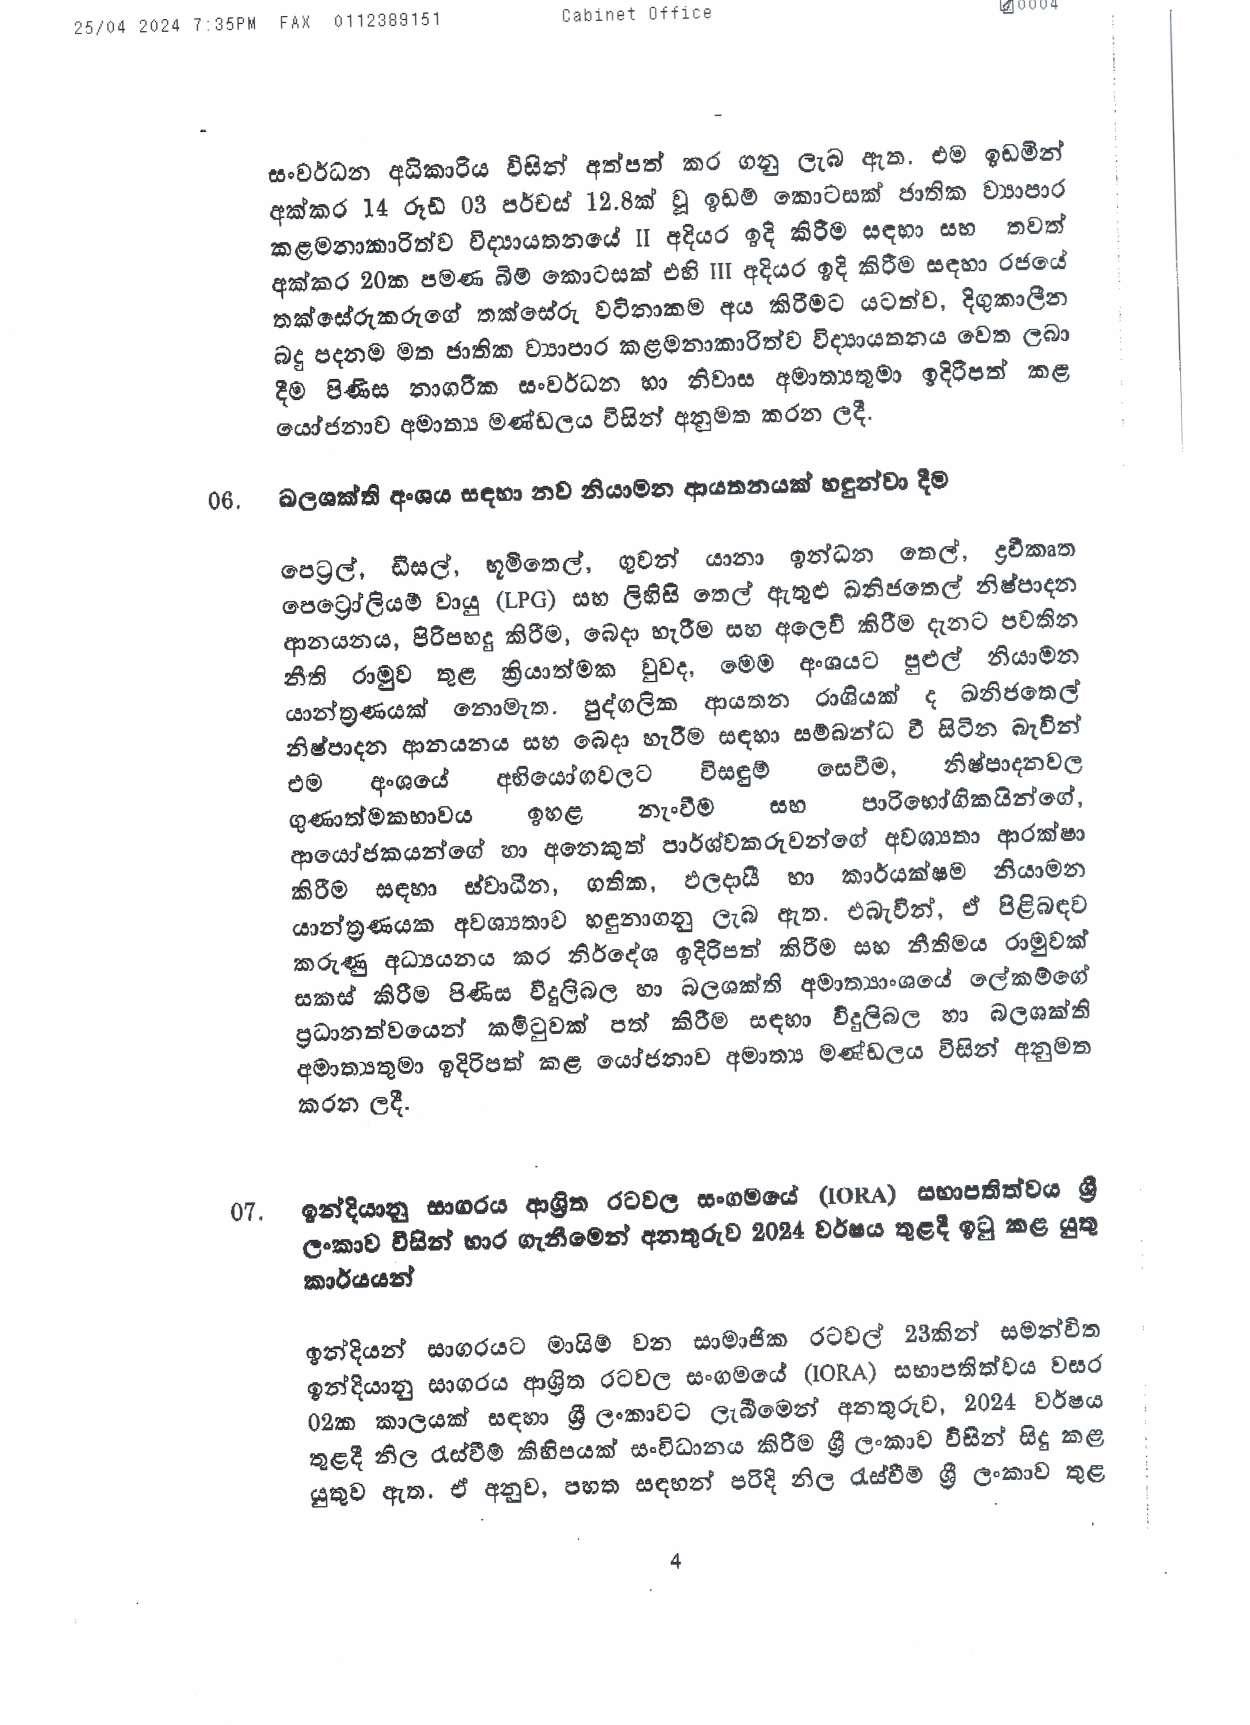 Cabinet Decision on 25.04.2024 page 004